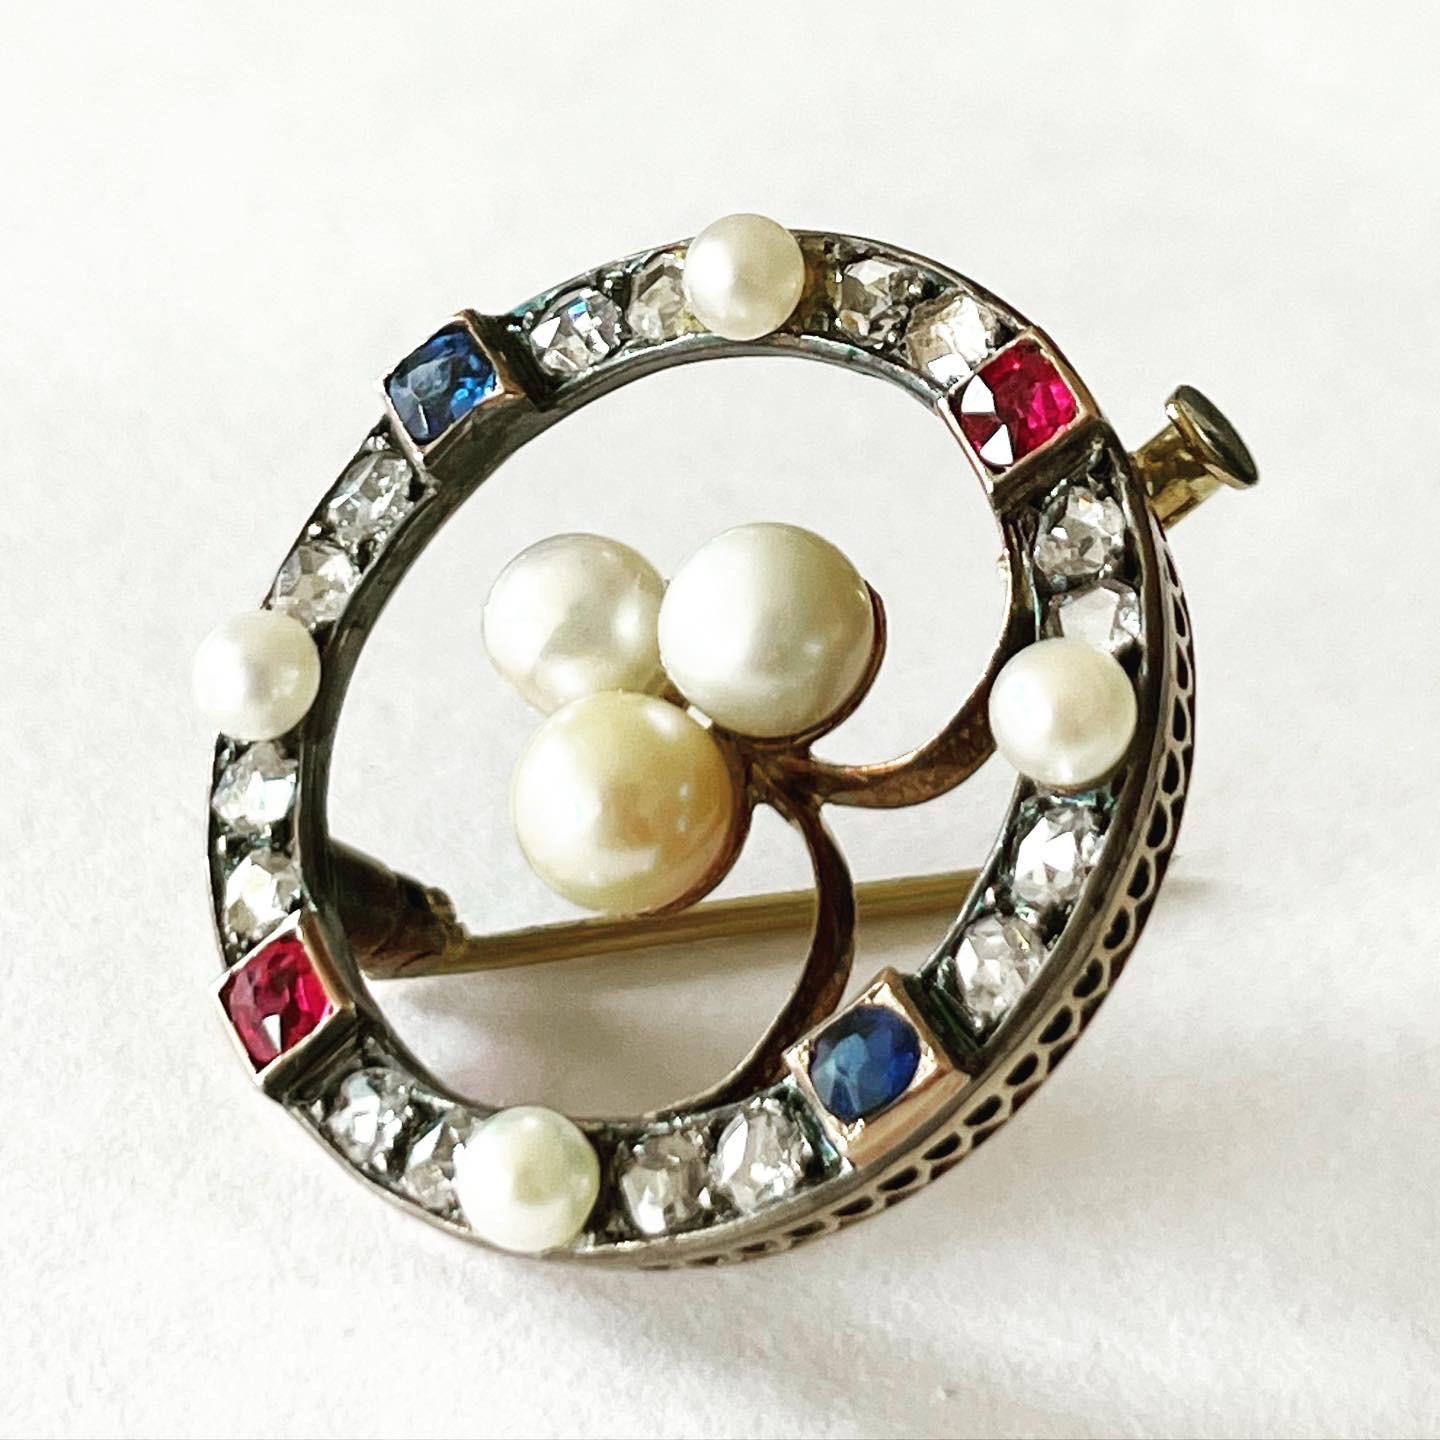 Old mine cut diamonds, rubys, sapphires and pearls 18k yellow gold and platinum brooch.
Probably France. Condition: Good.
Old mine cut diamonds ans old European sapphire and rubys cut.
Total approximate diamond carat weight: 0.8 carats.
Diameter: